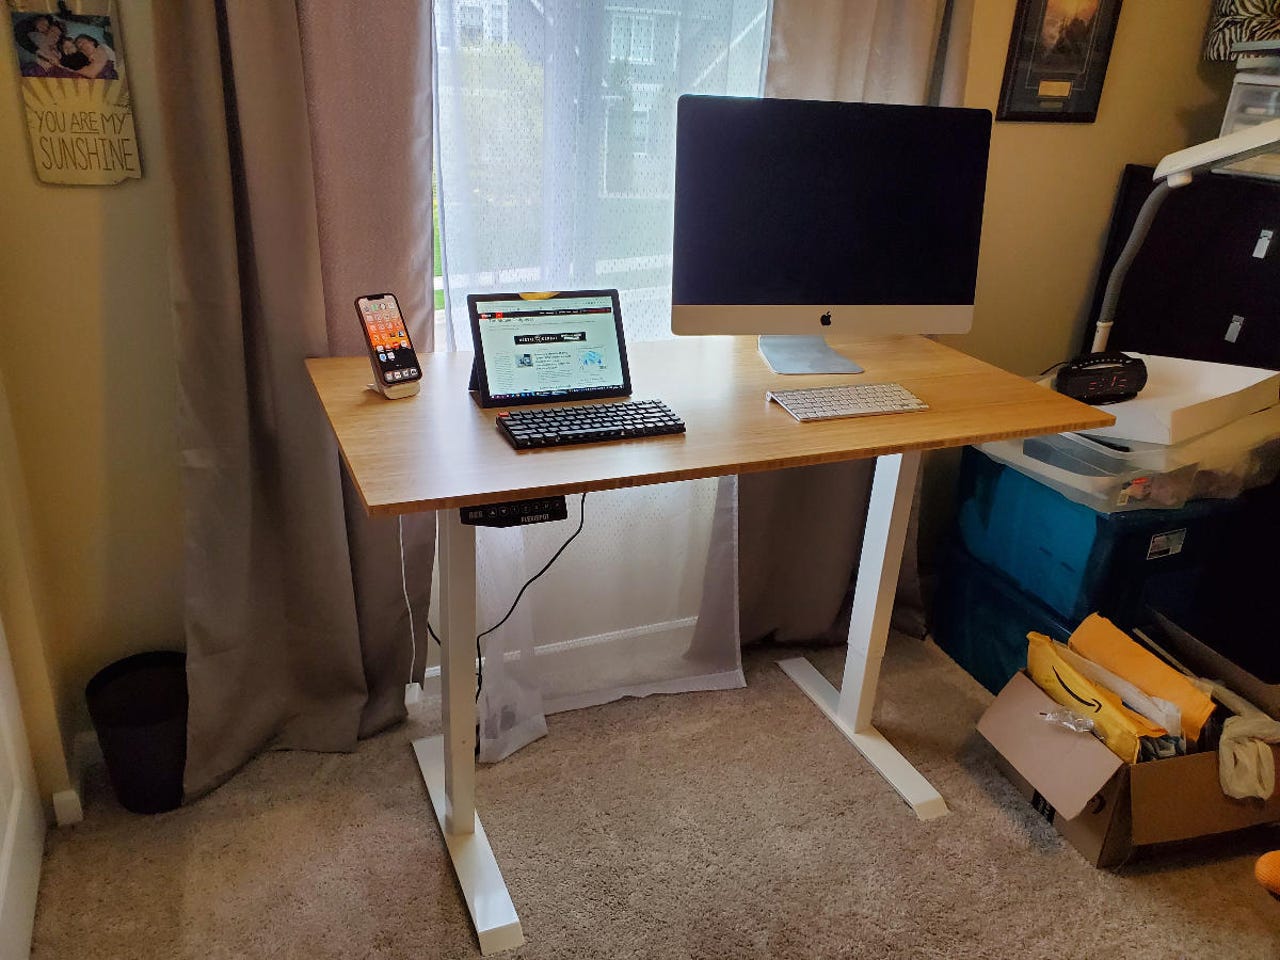 FlexiSpot Bamboo EN1 review: Affordable electric standing desk with stand  interval reminders